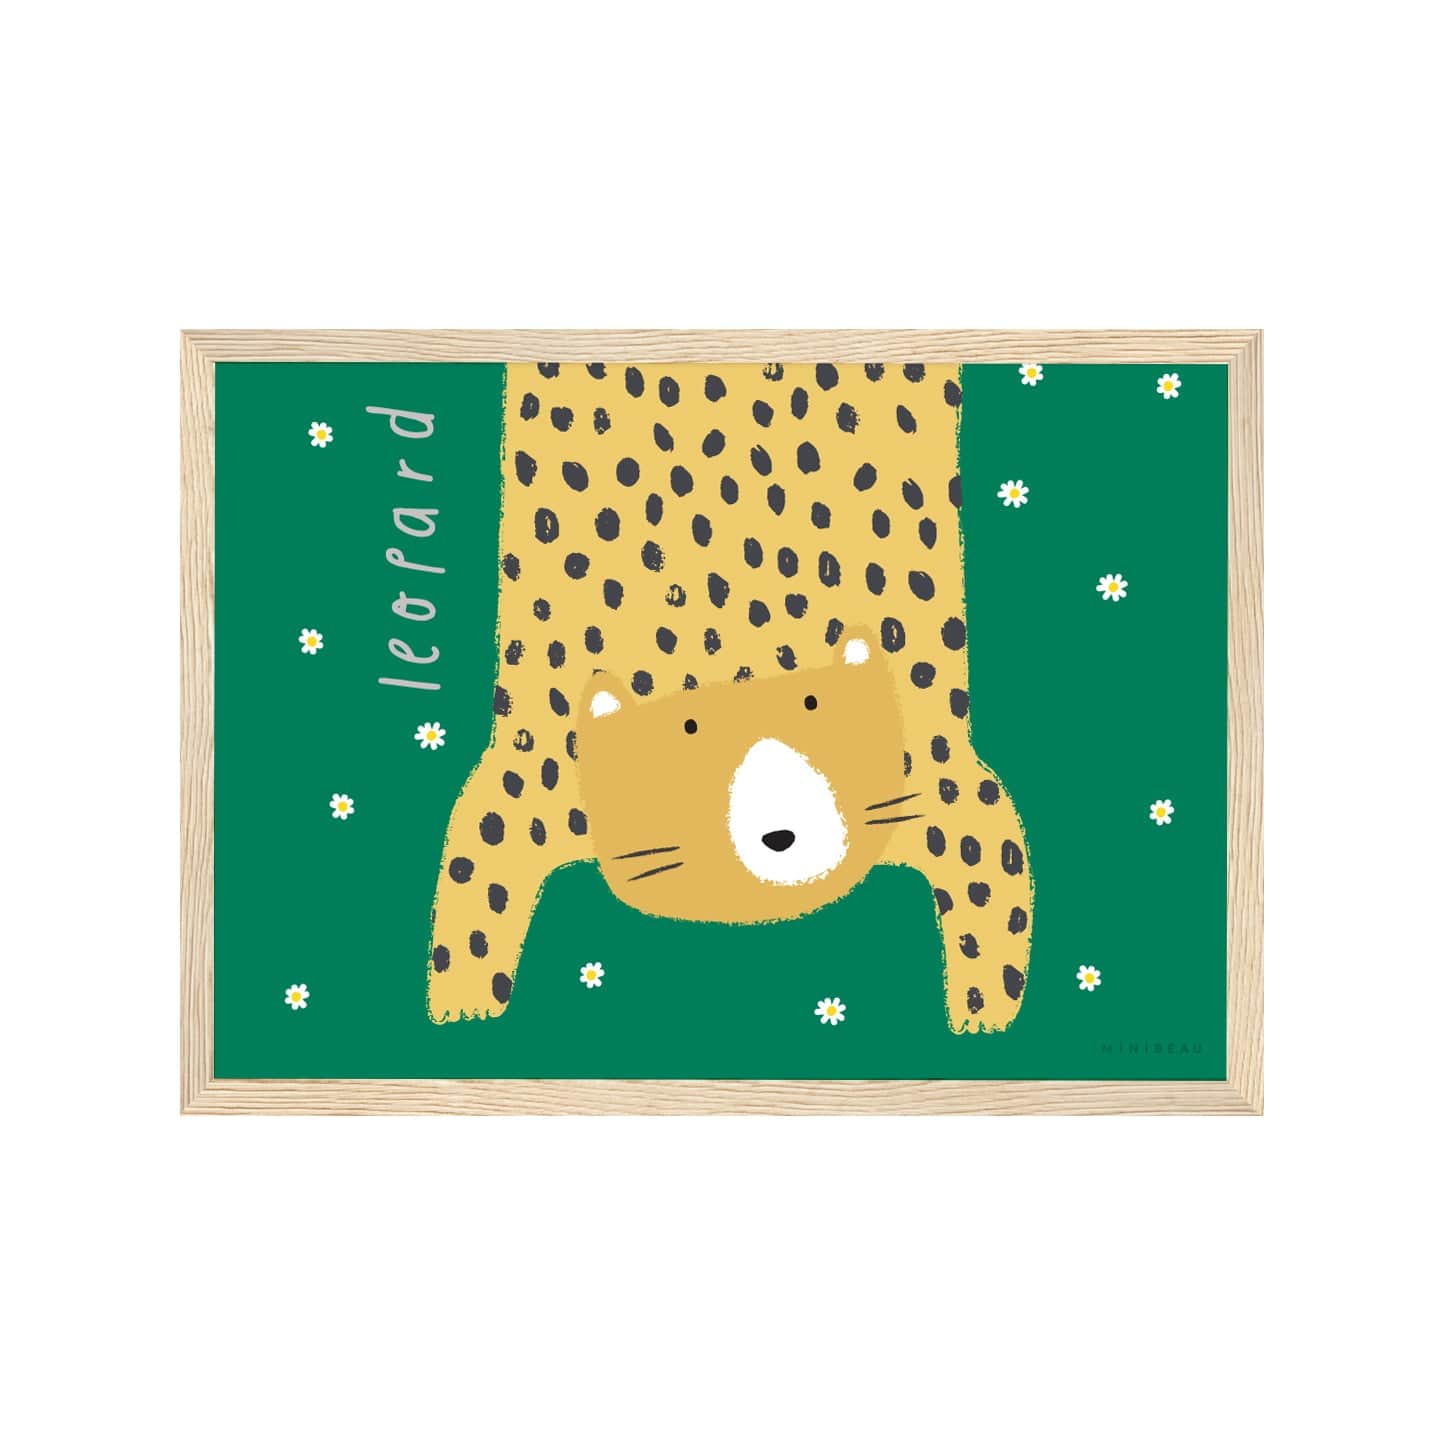 Our Leopard art print shows a hand-drawn leopard hanging down in to the picture, lifting it's head to look out at us on a green background with falling daisies, with the word leopard written alongside it, in a natural wooden frame